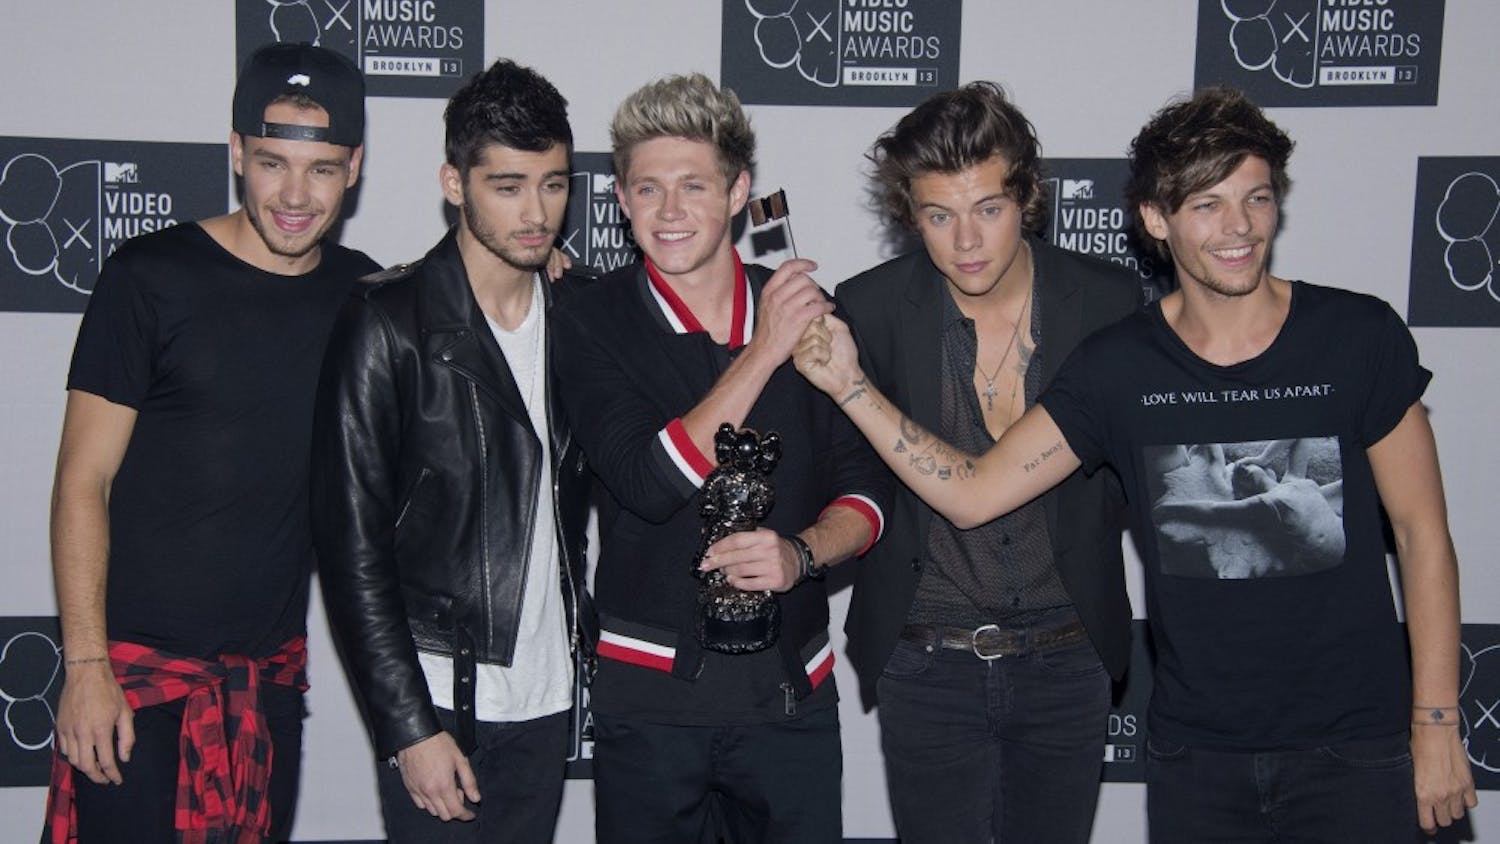 Liam Payne, Zayn Malik, Niall Horan, Harry Styles and Louis Tomlinson of One Direction celebrate their VMA for Song of the summer at the 2013 MTV Video Music Awards at The Barclay Center in New York City, NY, Sunday, August 25, 2013. (Lionel Hahn/Abaca Press/MCT)